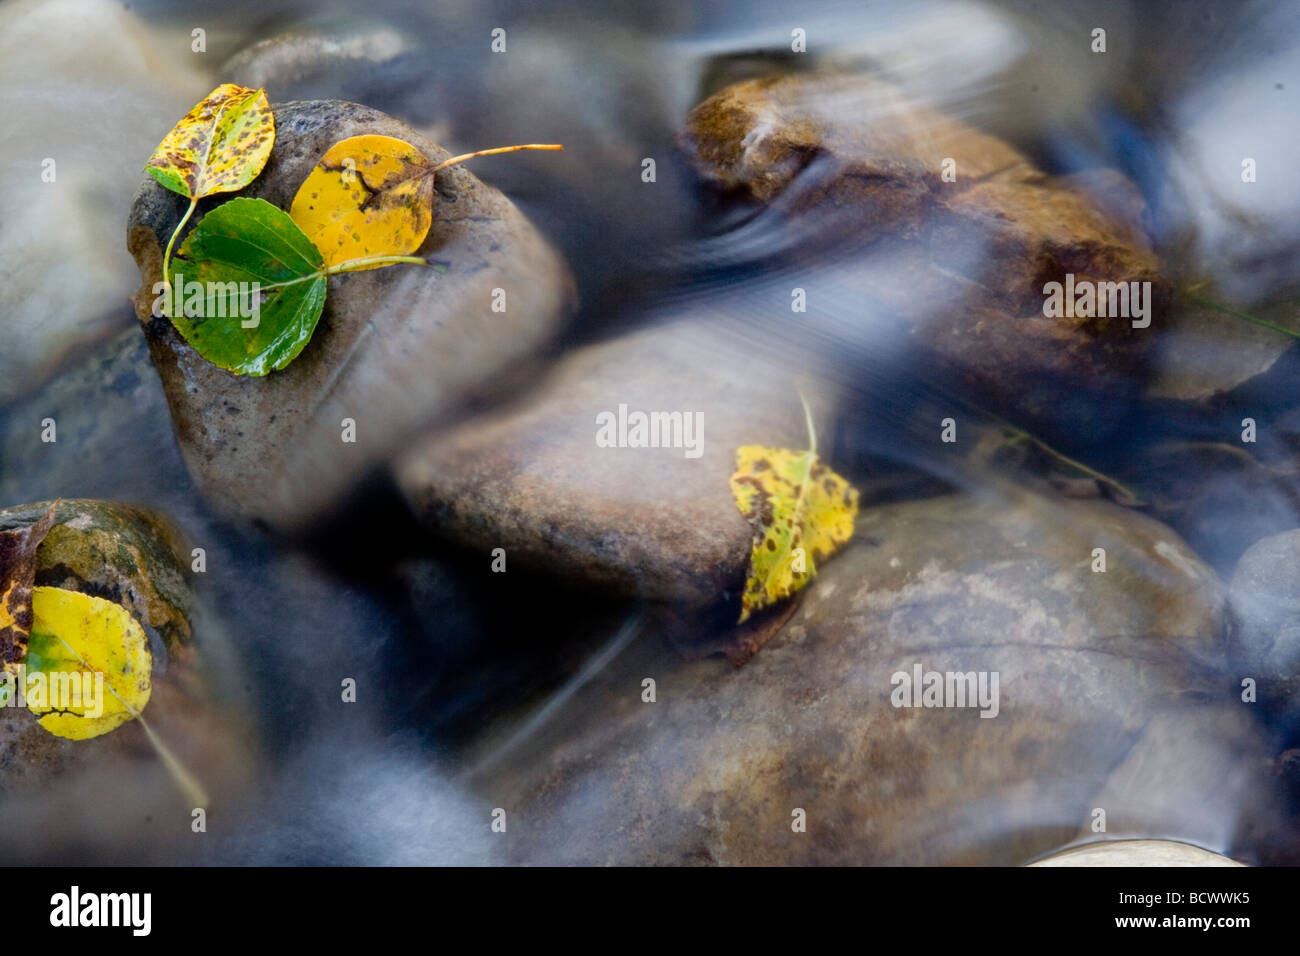 Autumn leaves held in place by rocks in a blurred stream. Stock Photo